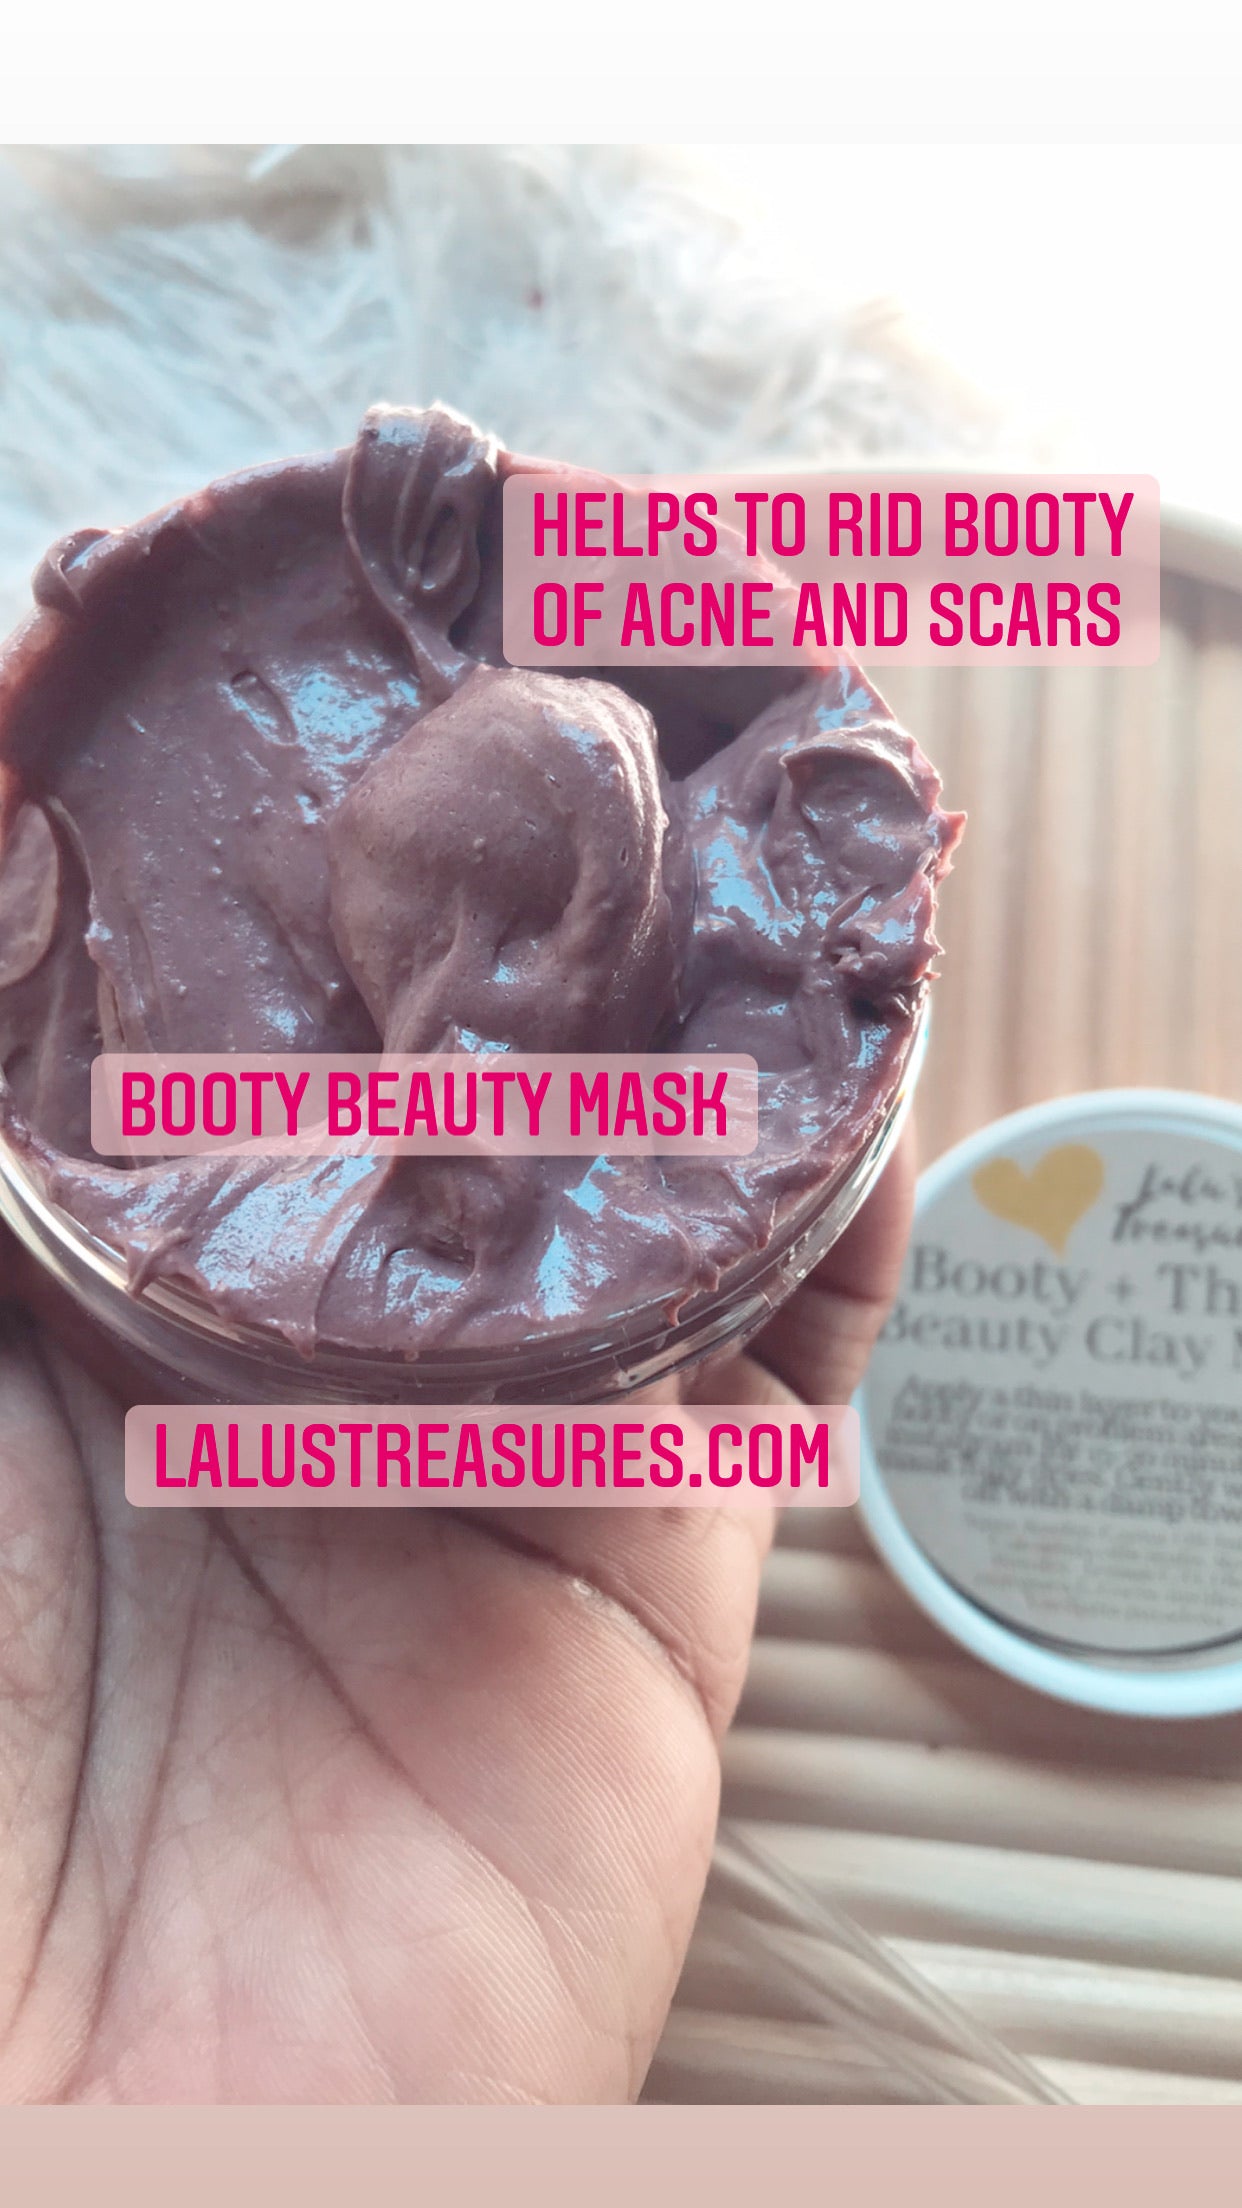 Booty Beauty Mask: Clear Up Acne and Make Booty Smooth